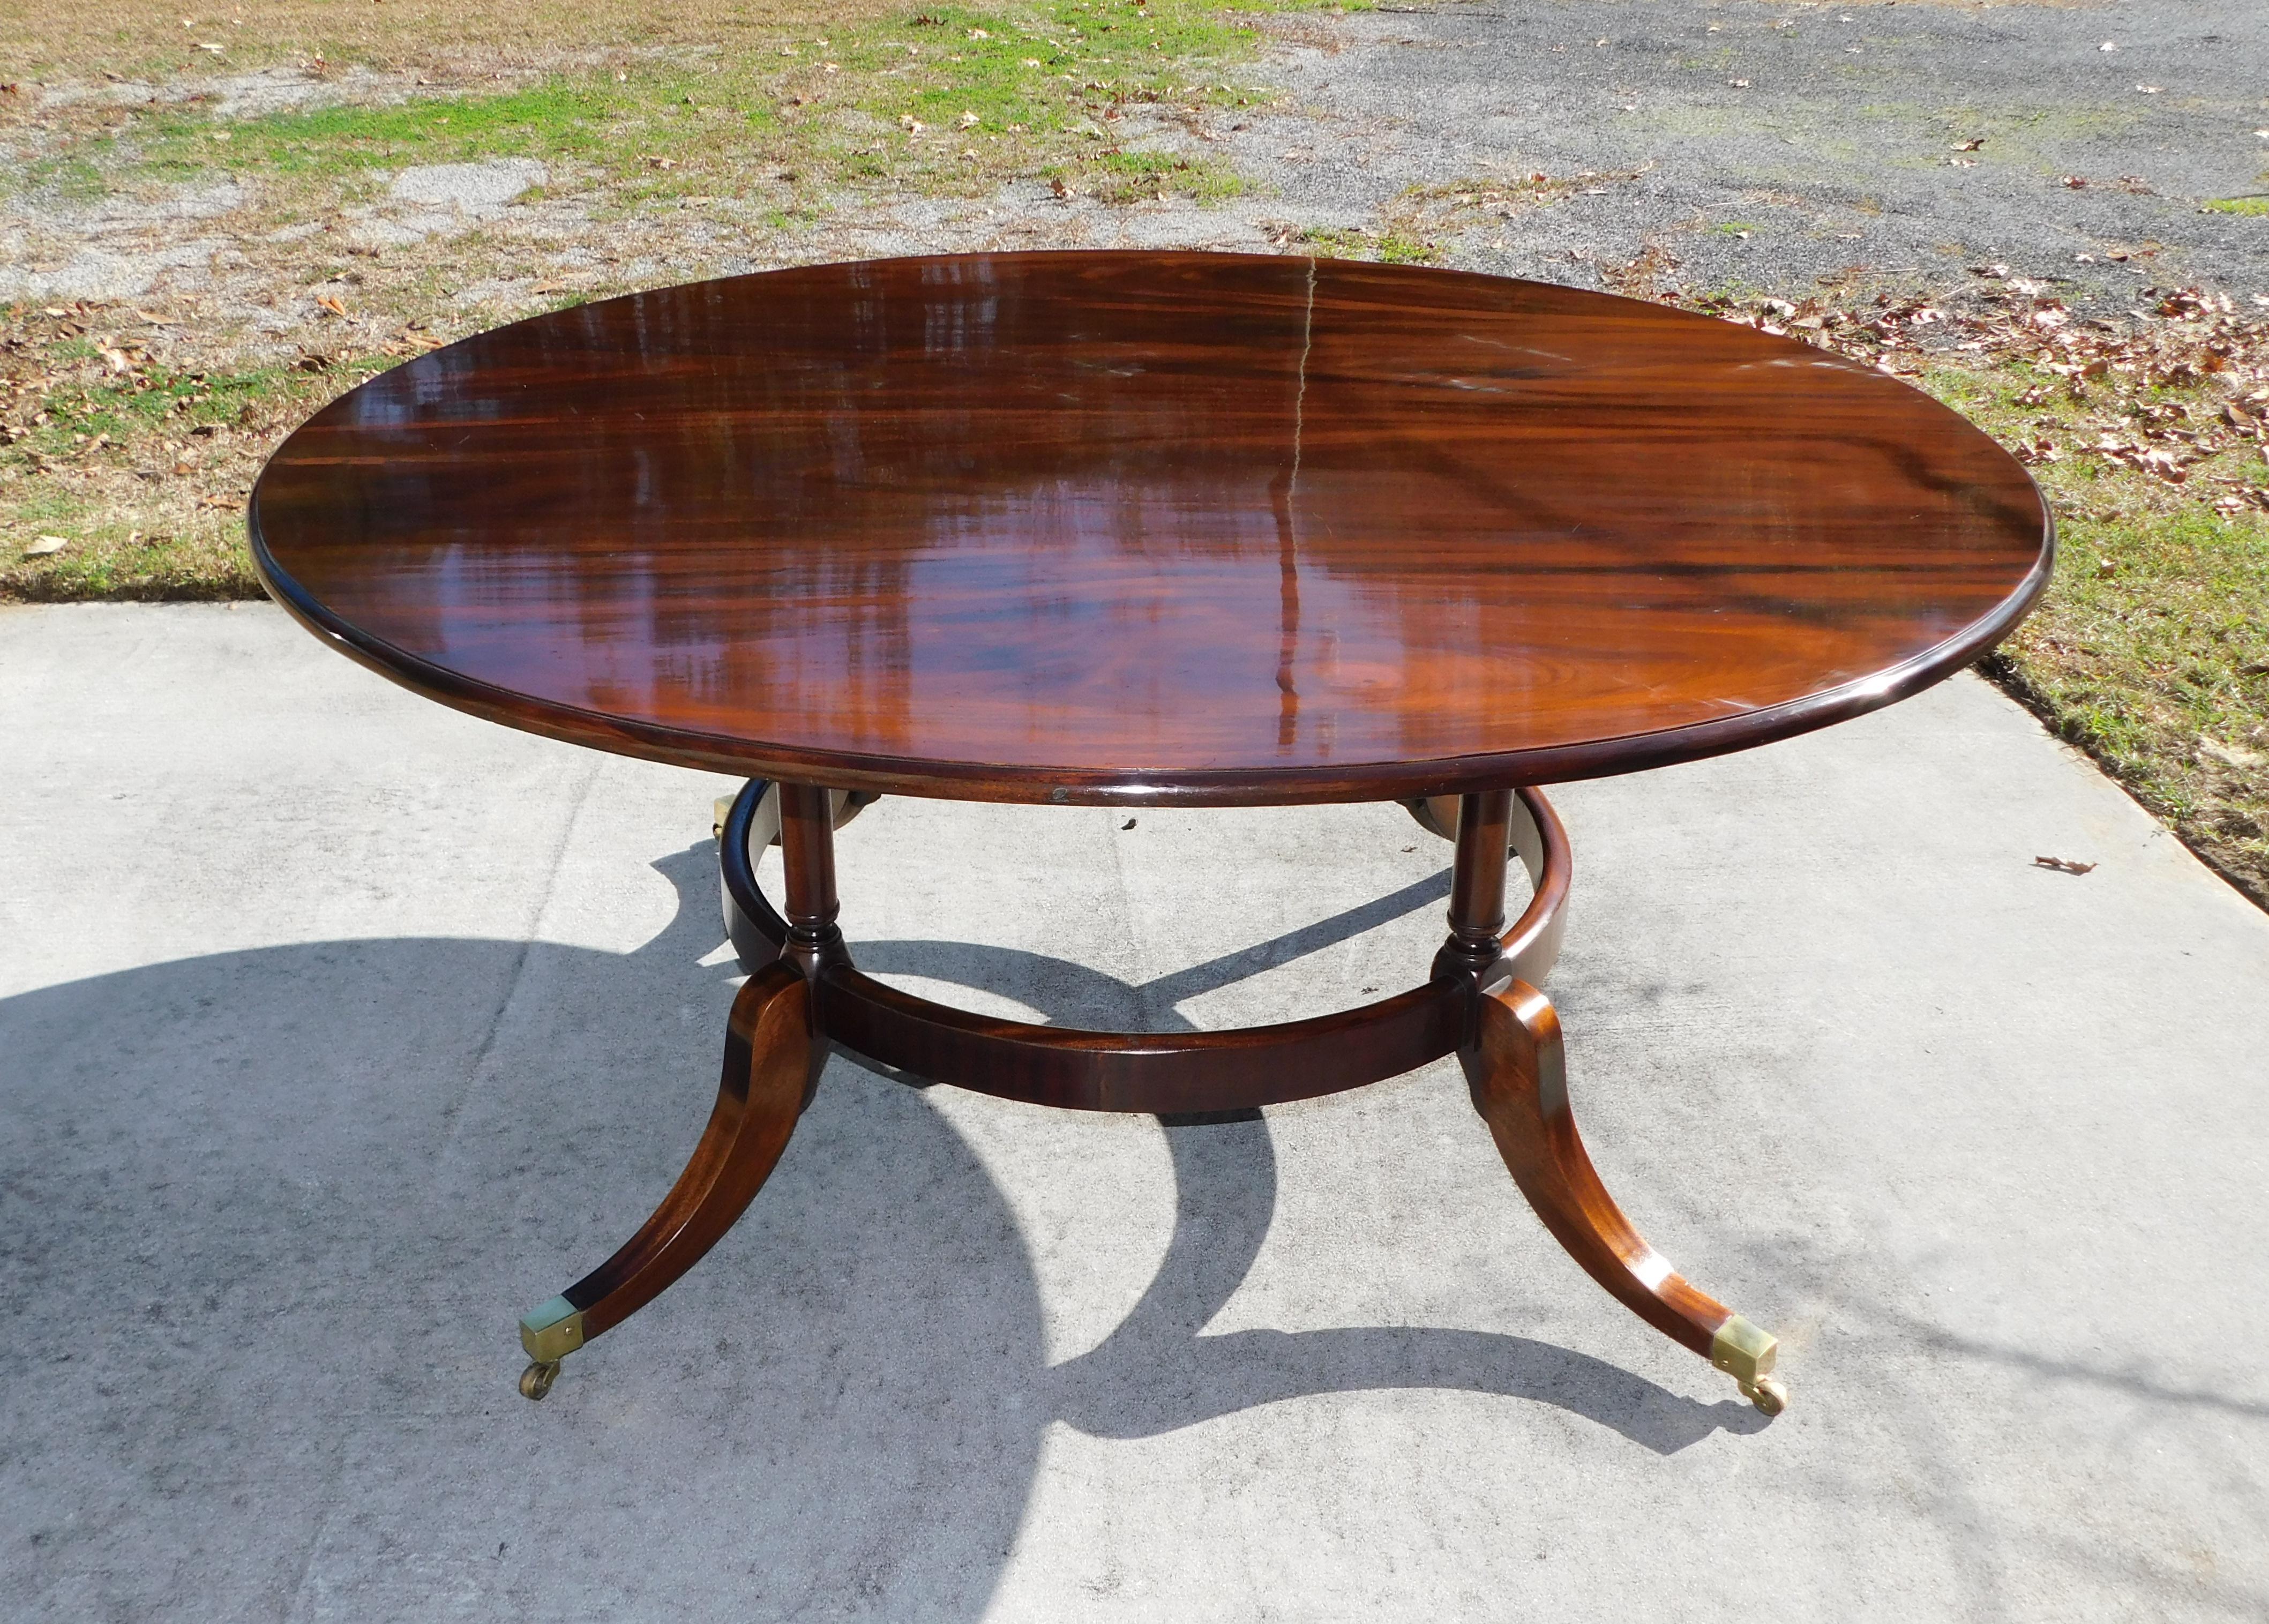 English Regency Mahogany circular dining room table with turned ringed support columns, lower circular skirt, and resting on splayed legs with the original brass casters. Mid 19th century.